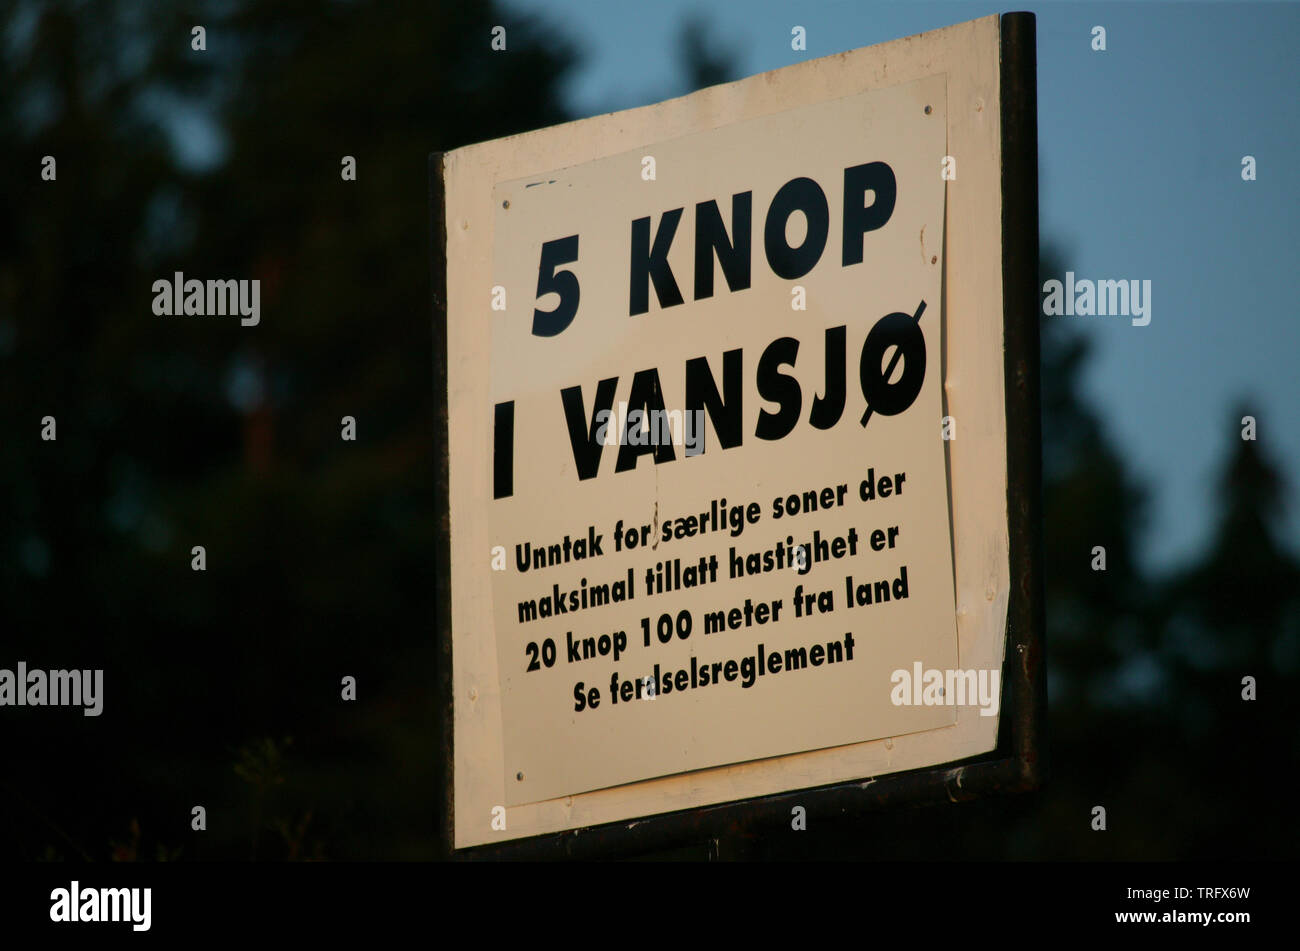 Sign showing speed limit for boats in the lake Vansjø in Østfold, Norway. Vansjø is a part of the water system called Morsavassdraget. September, 2006. Stock Photo